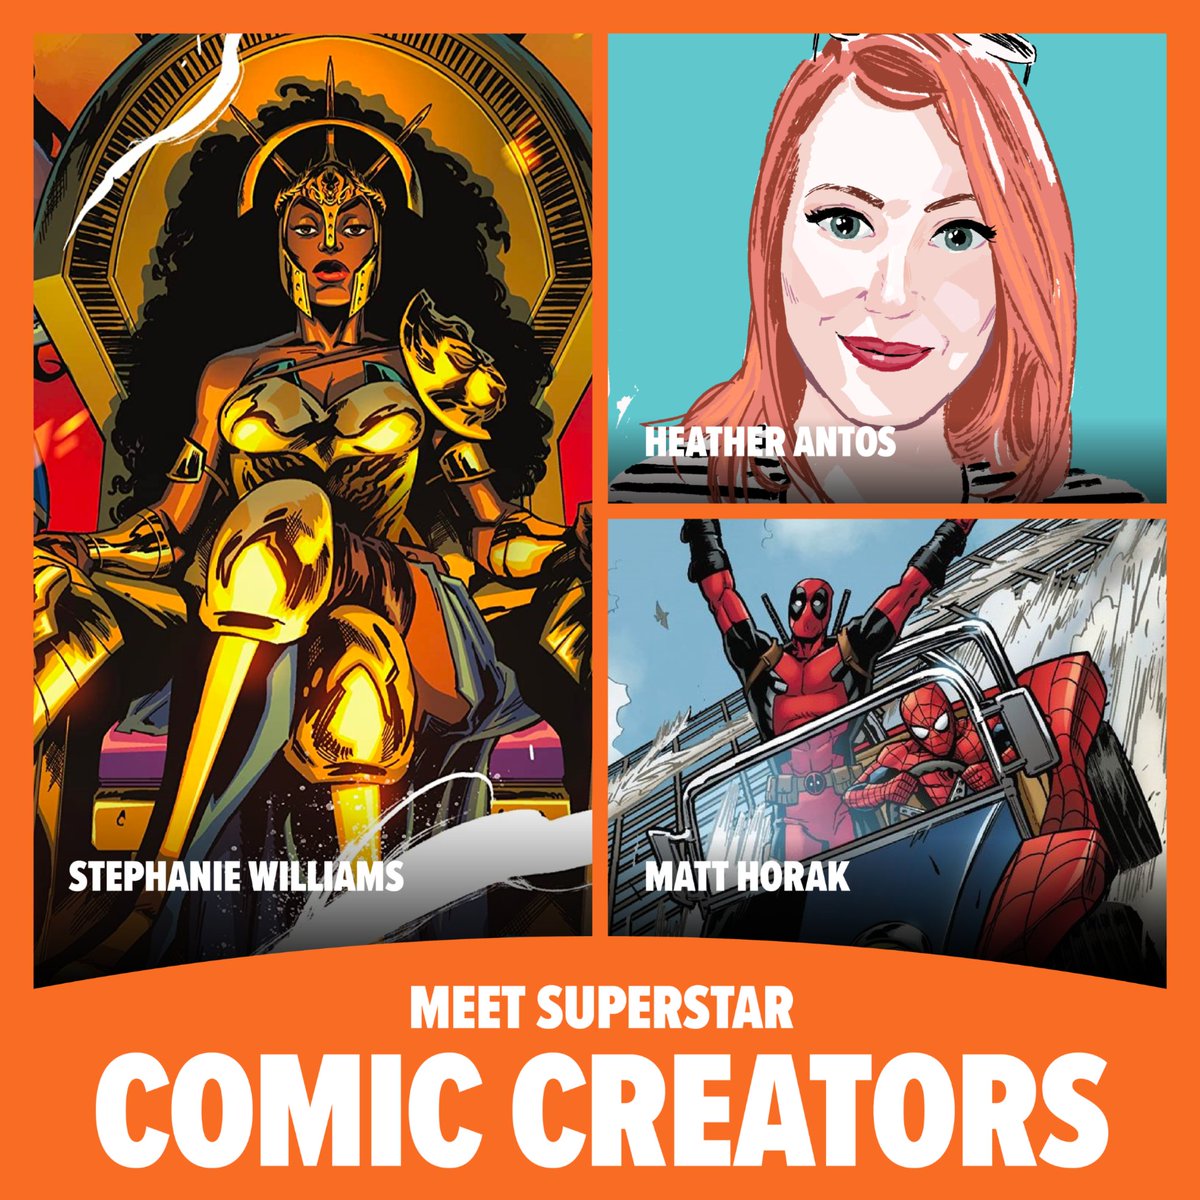 Ready to get drawn into the world of comics? Your favorite comic creators are coming to #FANEXPOCleveland. Plus, don’t miss out on epic events and highly collectible show exclusives. Get your tickets now: spr.ly/6016ZAoYo #cleveland #ohio #cle #clevelandohio #comics #art